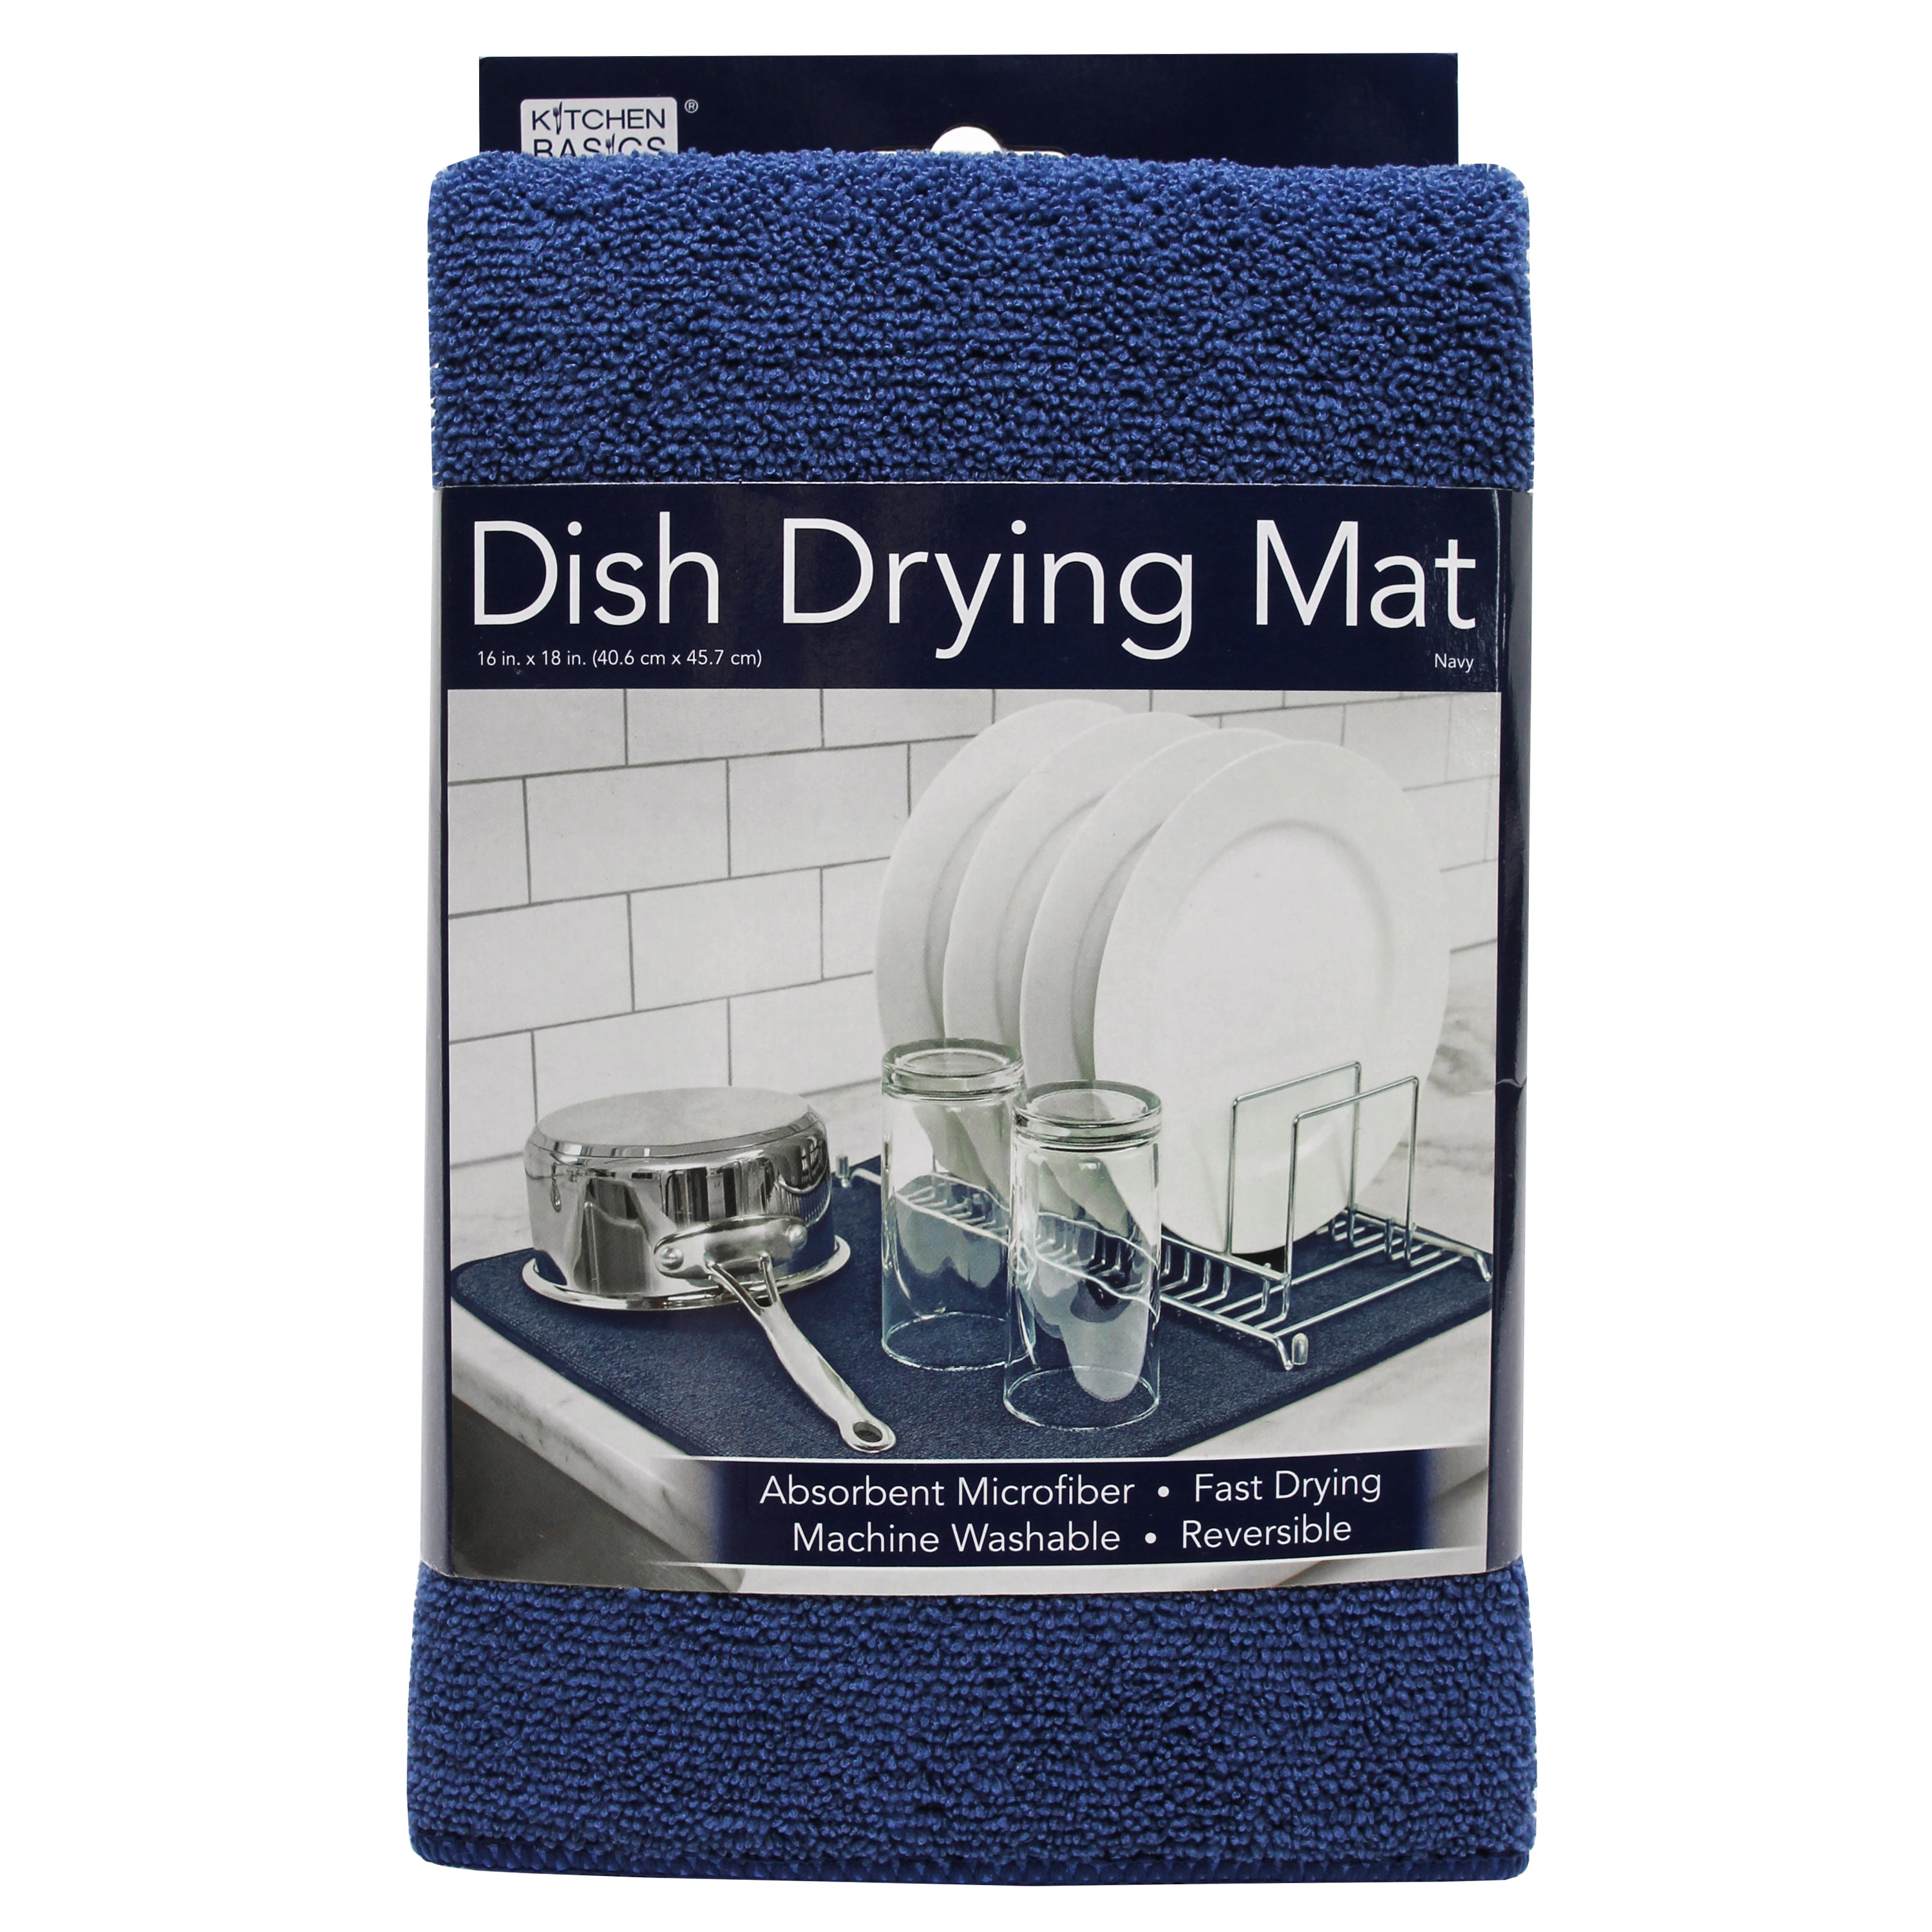 DEVBEST Dish Drying Mat - Ultra Absorbent Dish Drying Mats - Machine  Washable and Super Fast Drying - Practical Solution for Efficiently Drying  Dishes